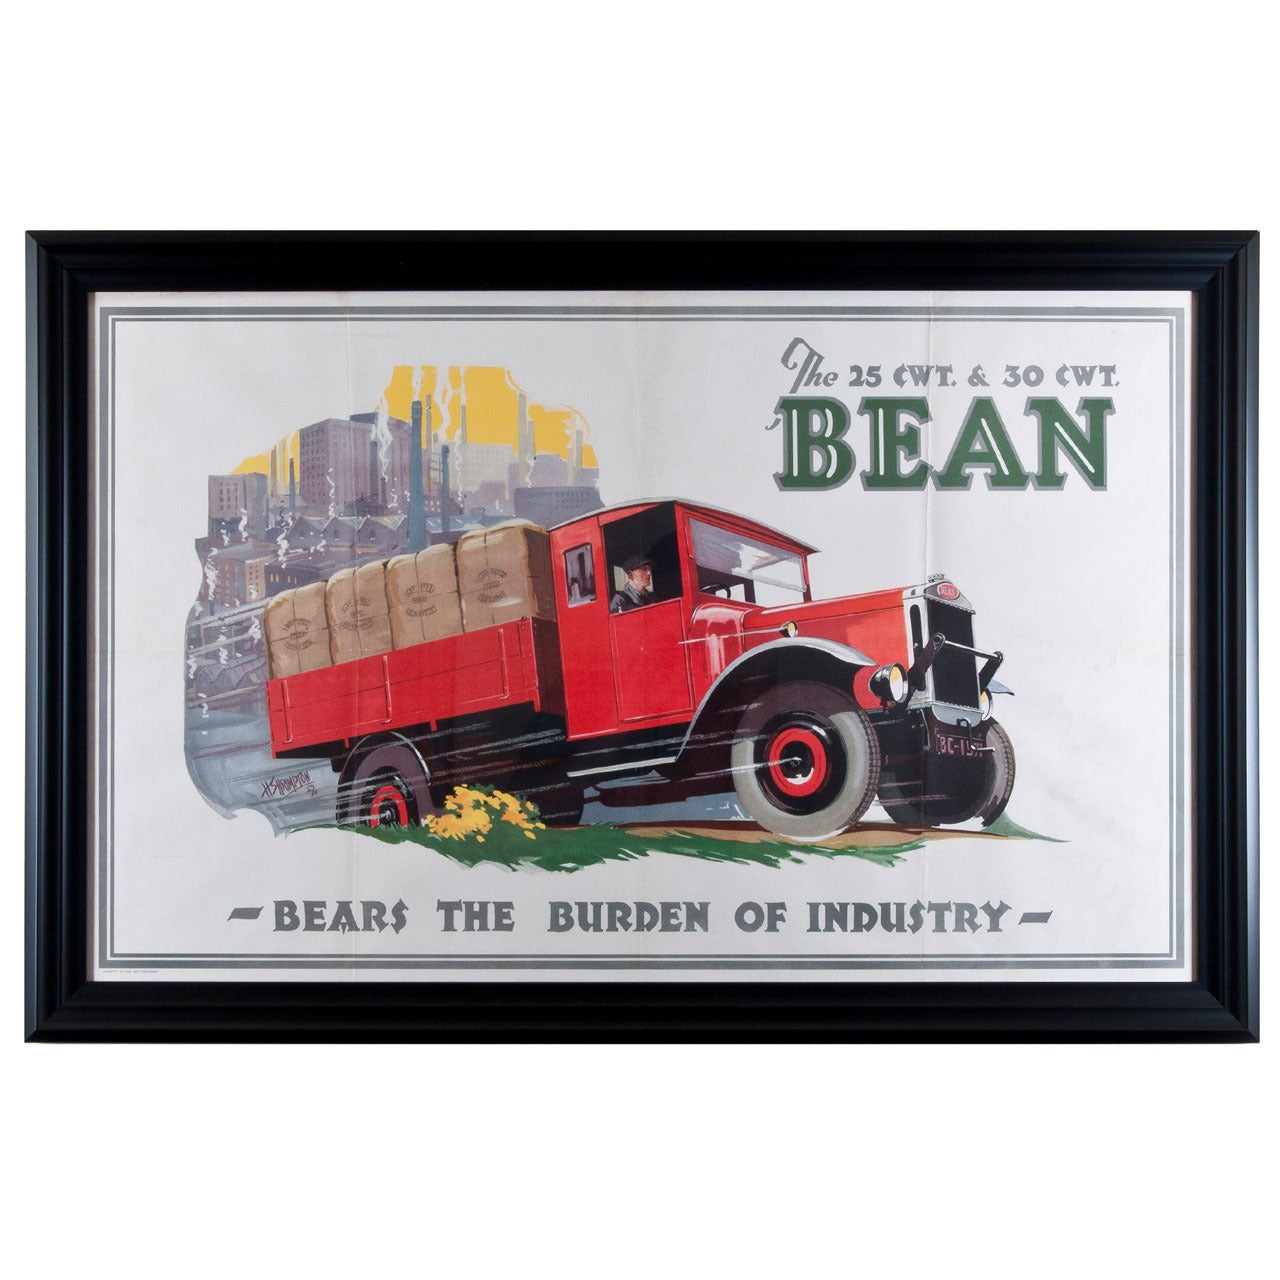 1930s Original Bean 25 CWT Advertising Poster For Sale